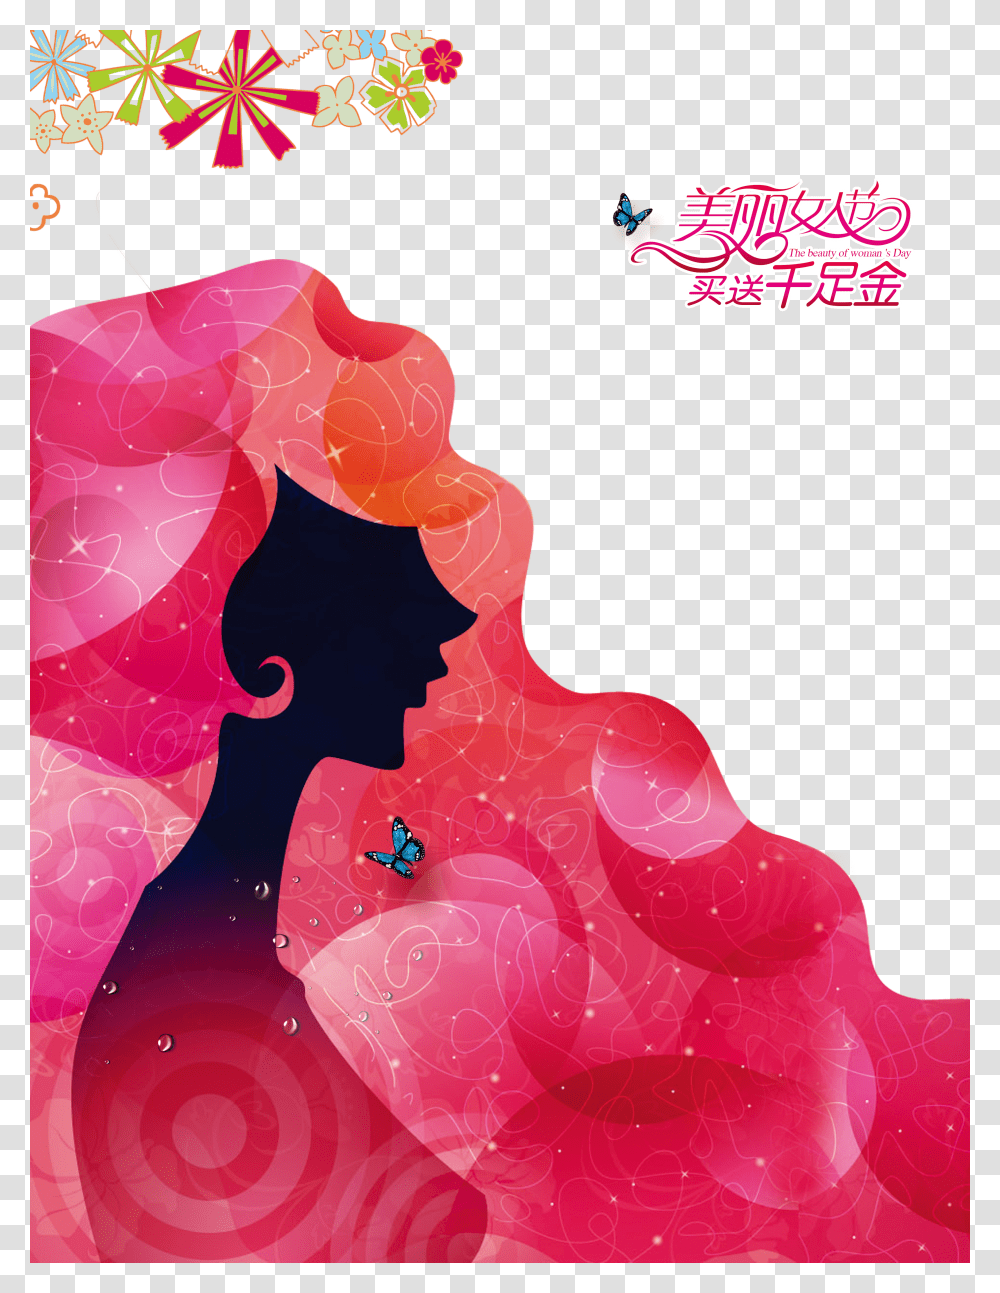 Image Free Download Woman Poster Women Festival Material Transparent Png